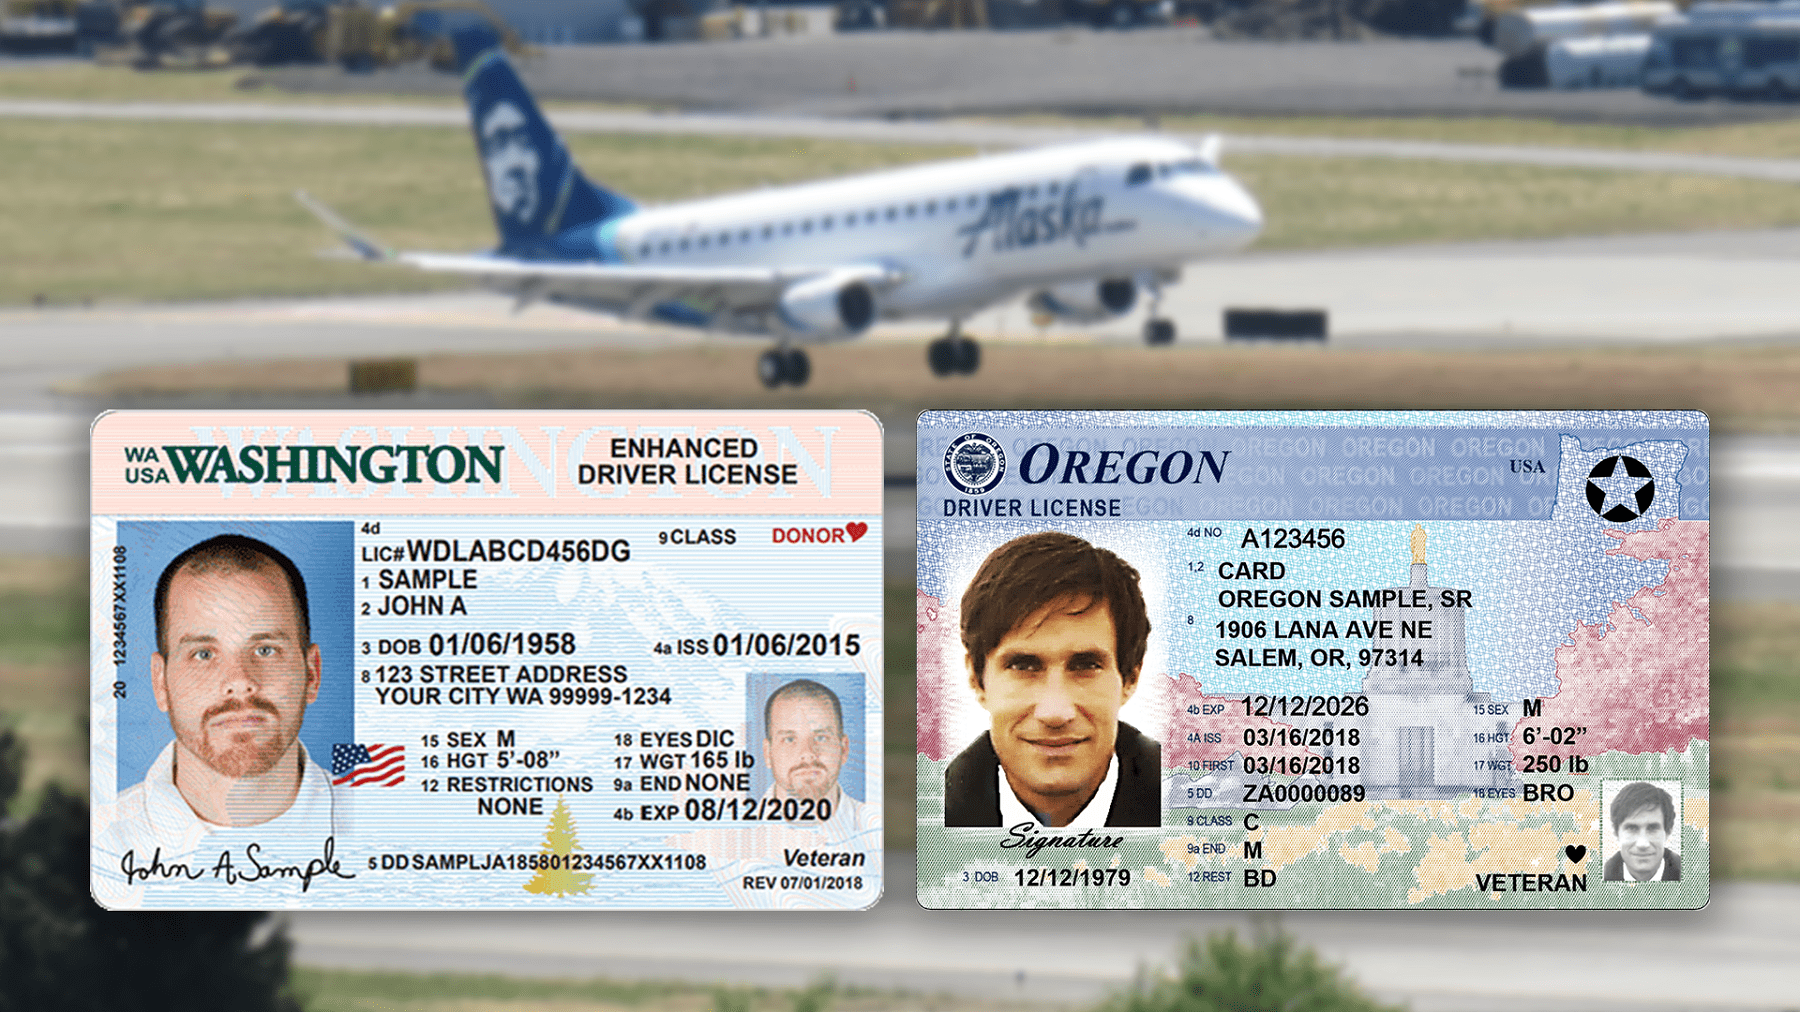 Domestic air travelers are on notice to have federally acceptable ID cards by October 1, 2020. COMPOSITE PHOTO BY MCKAYLA FOX / NWPB